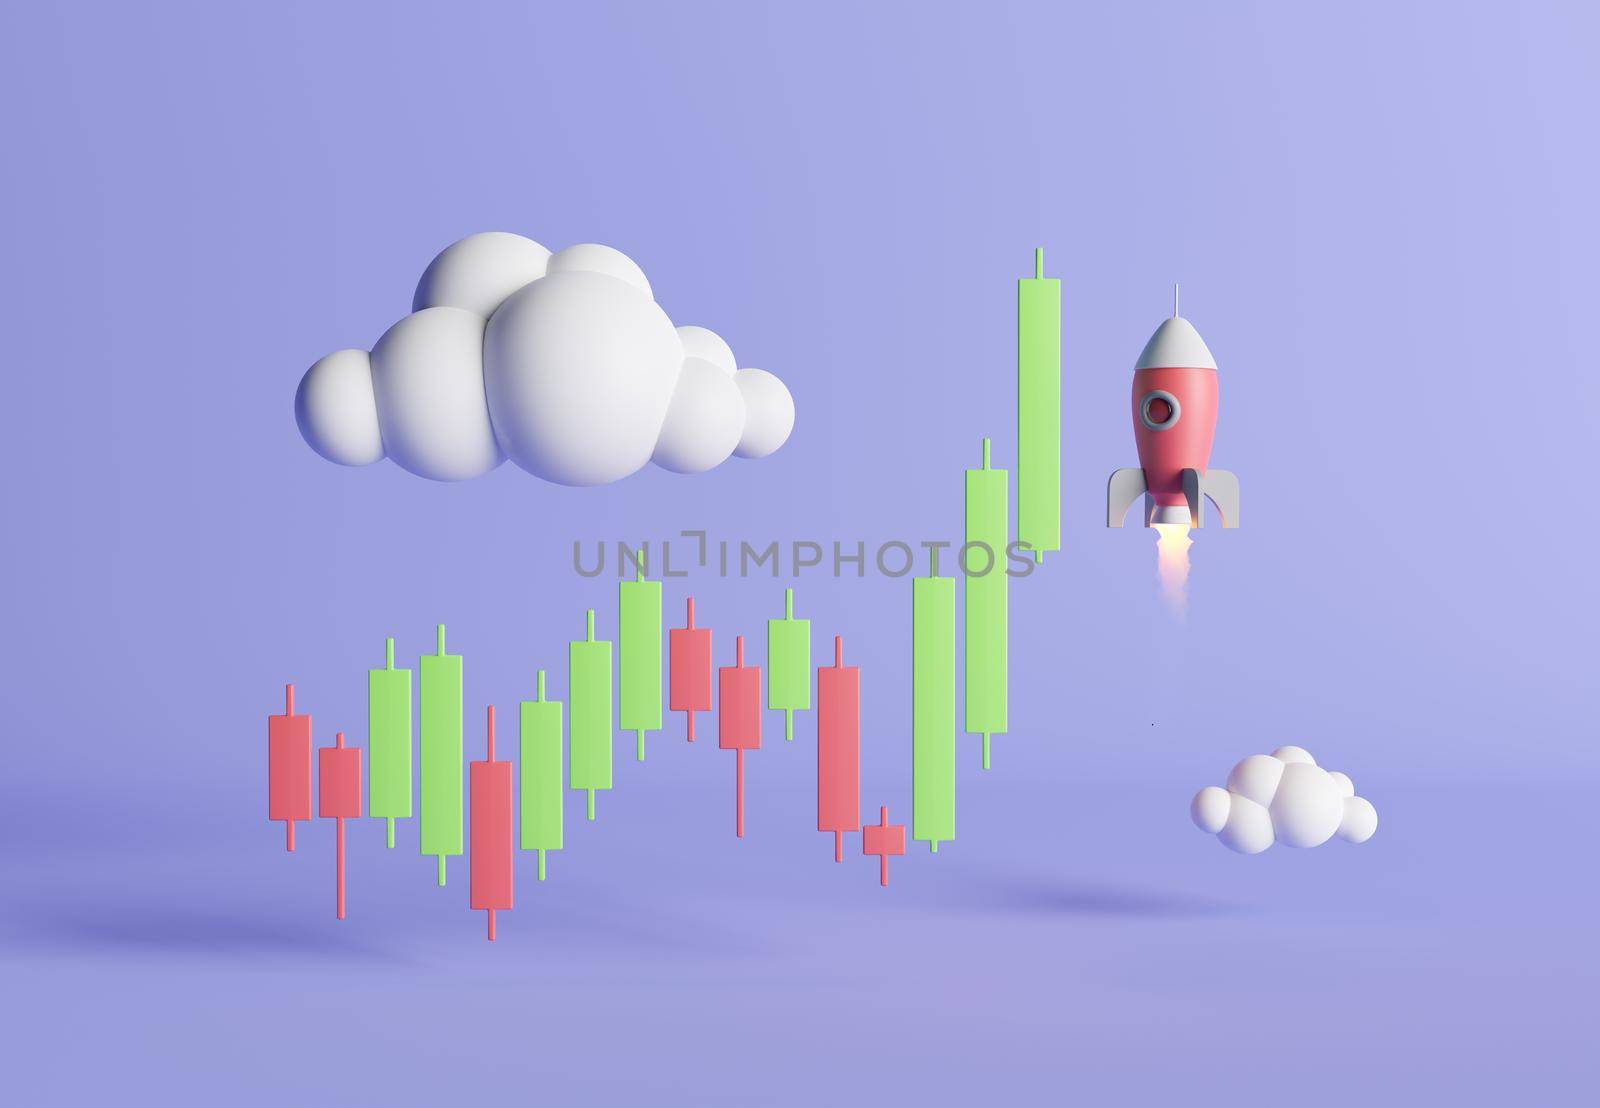 candlestick graphic with a rocket ascending through the clouds by asolano